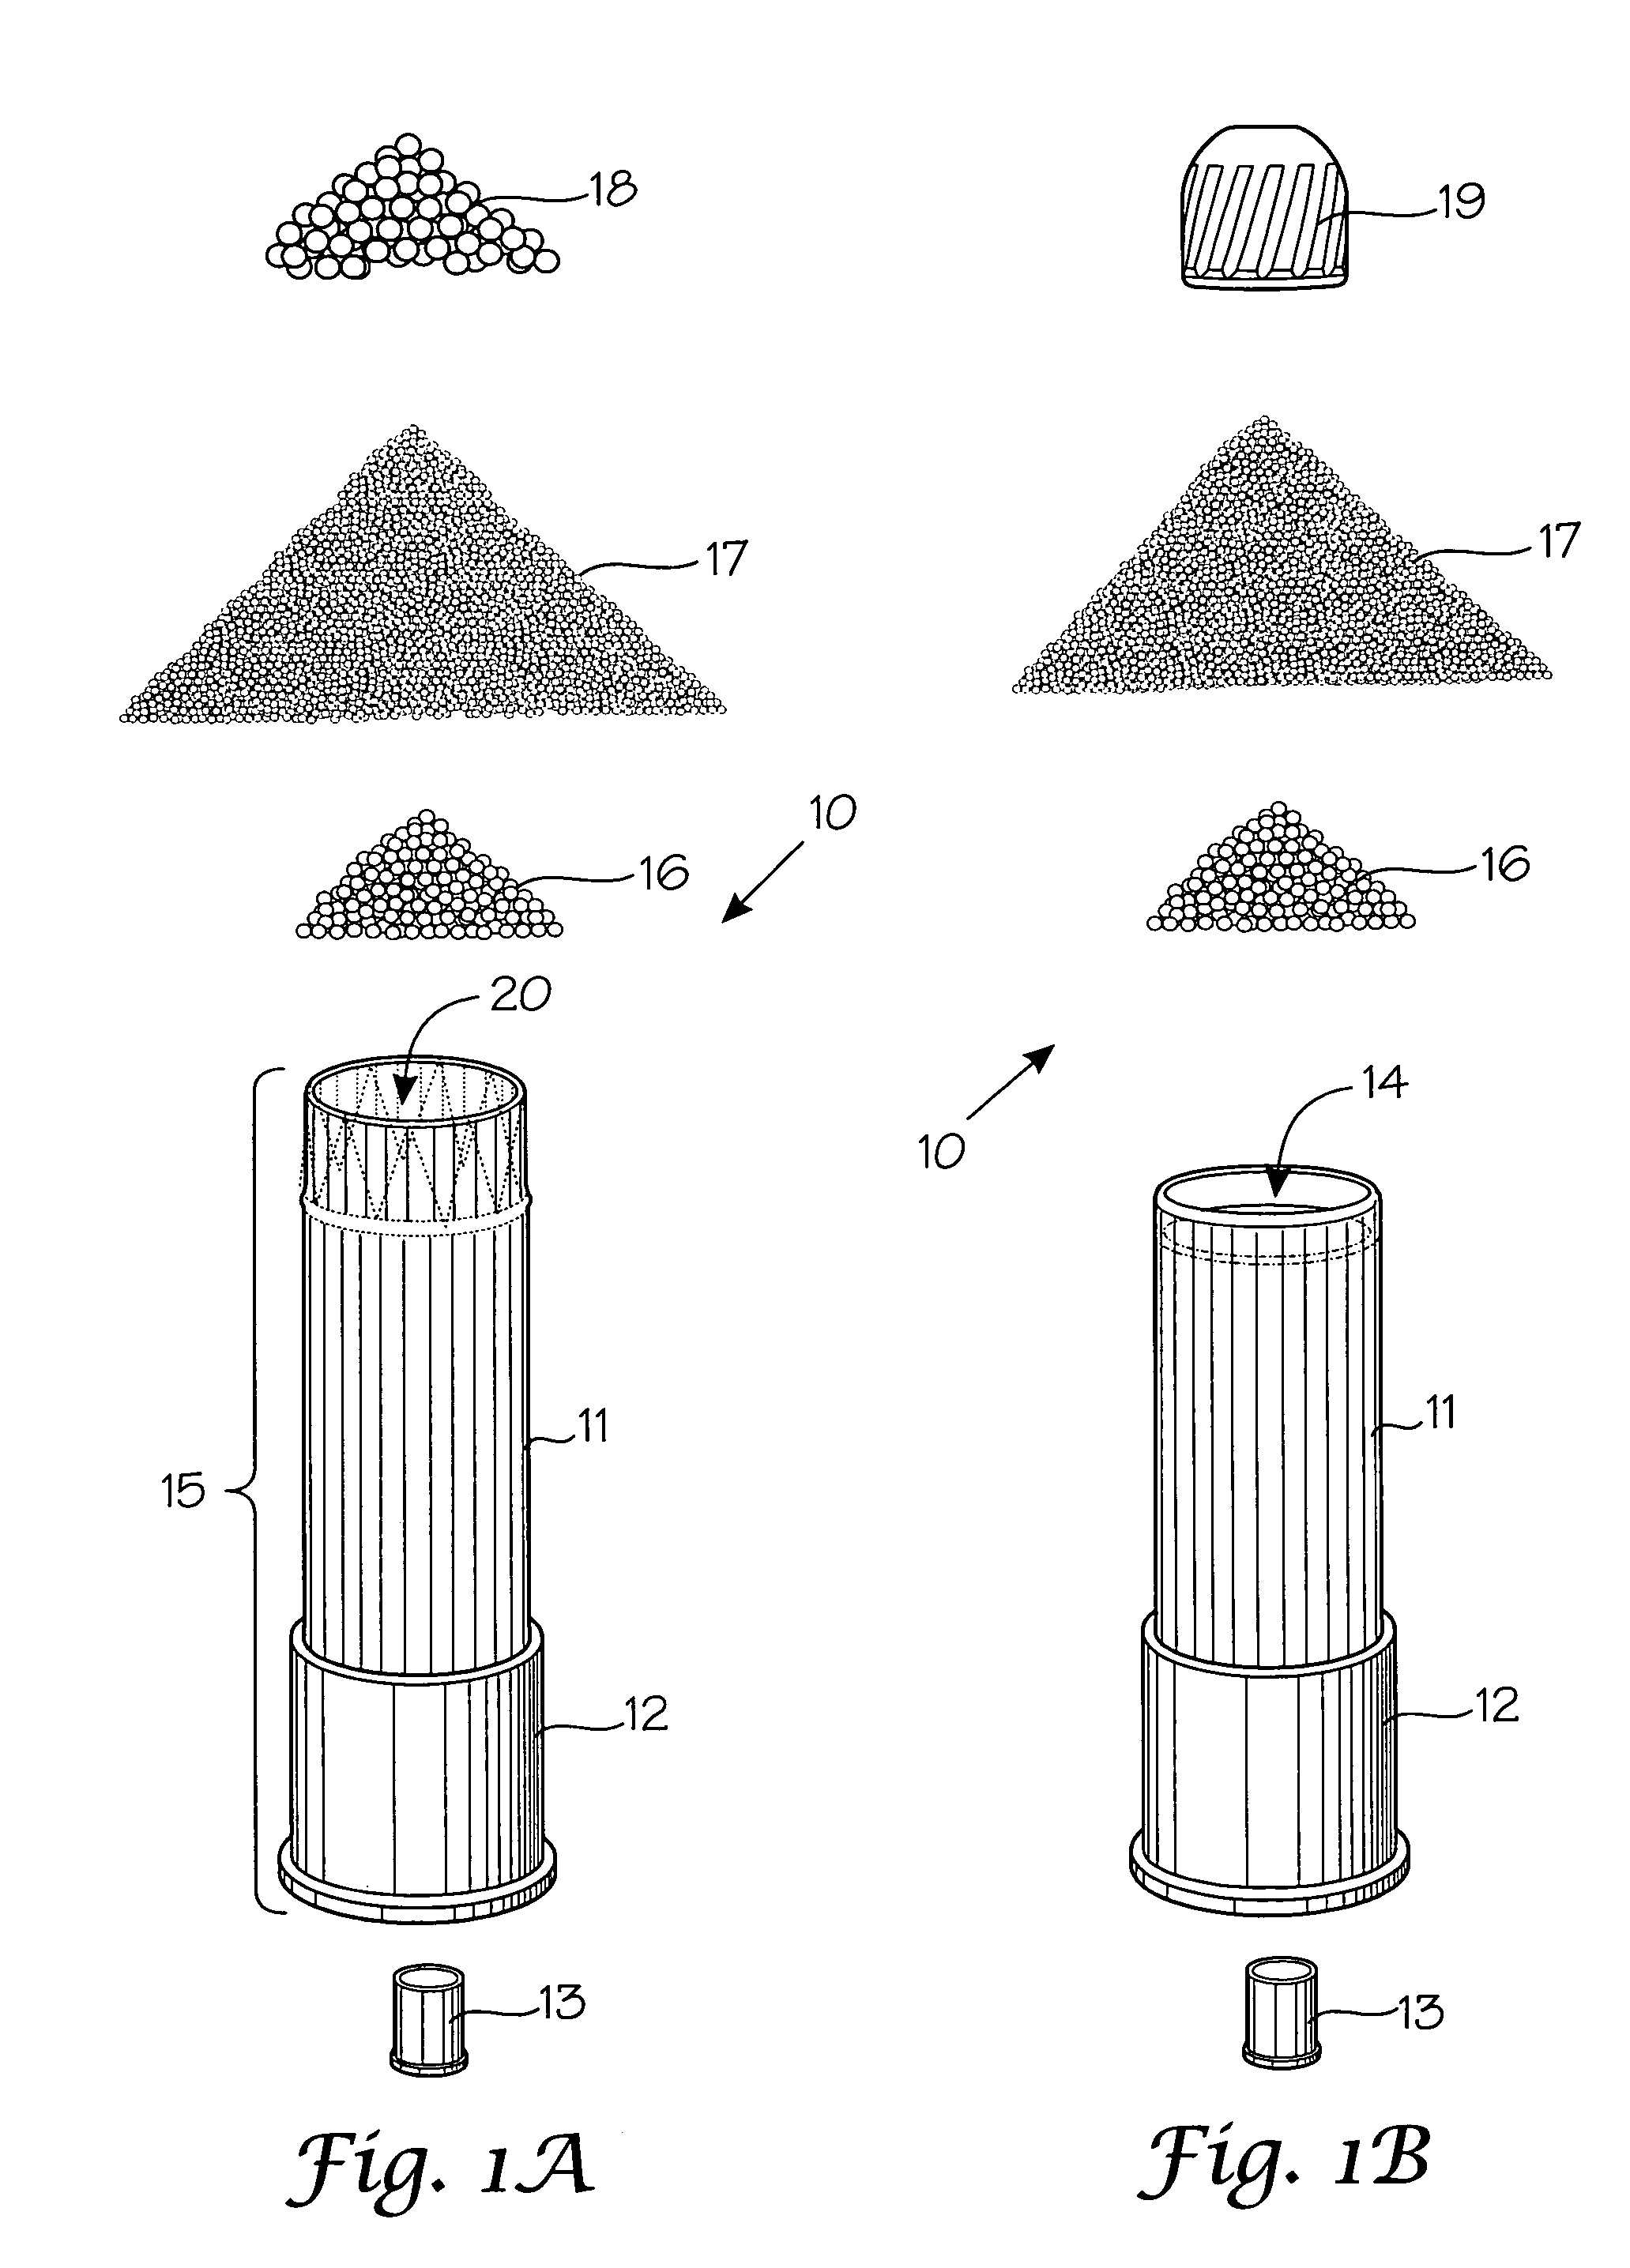 Method and apparatus for manufacturing wad-less ammunition